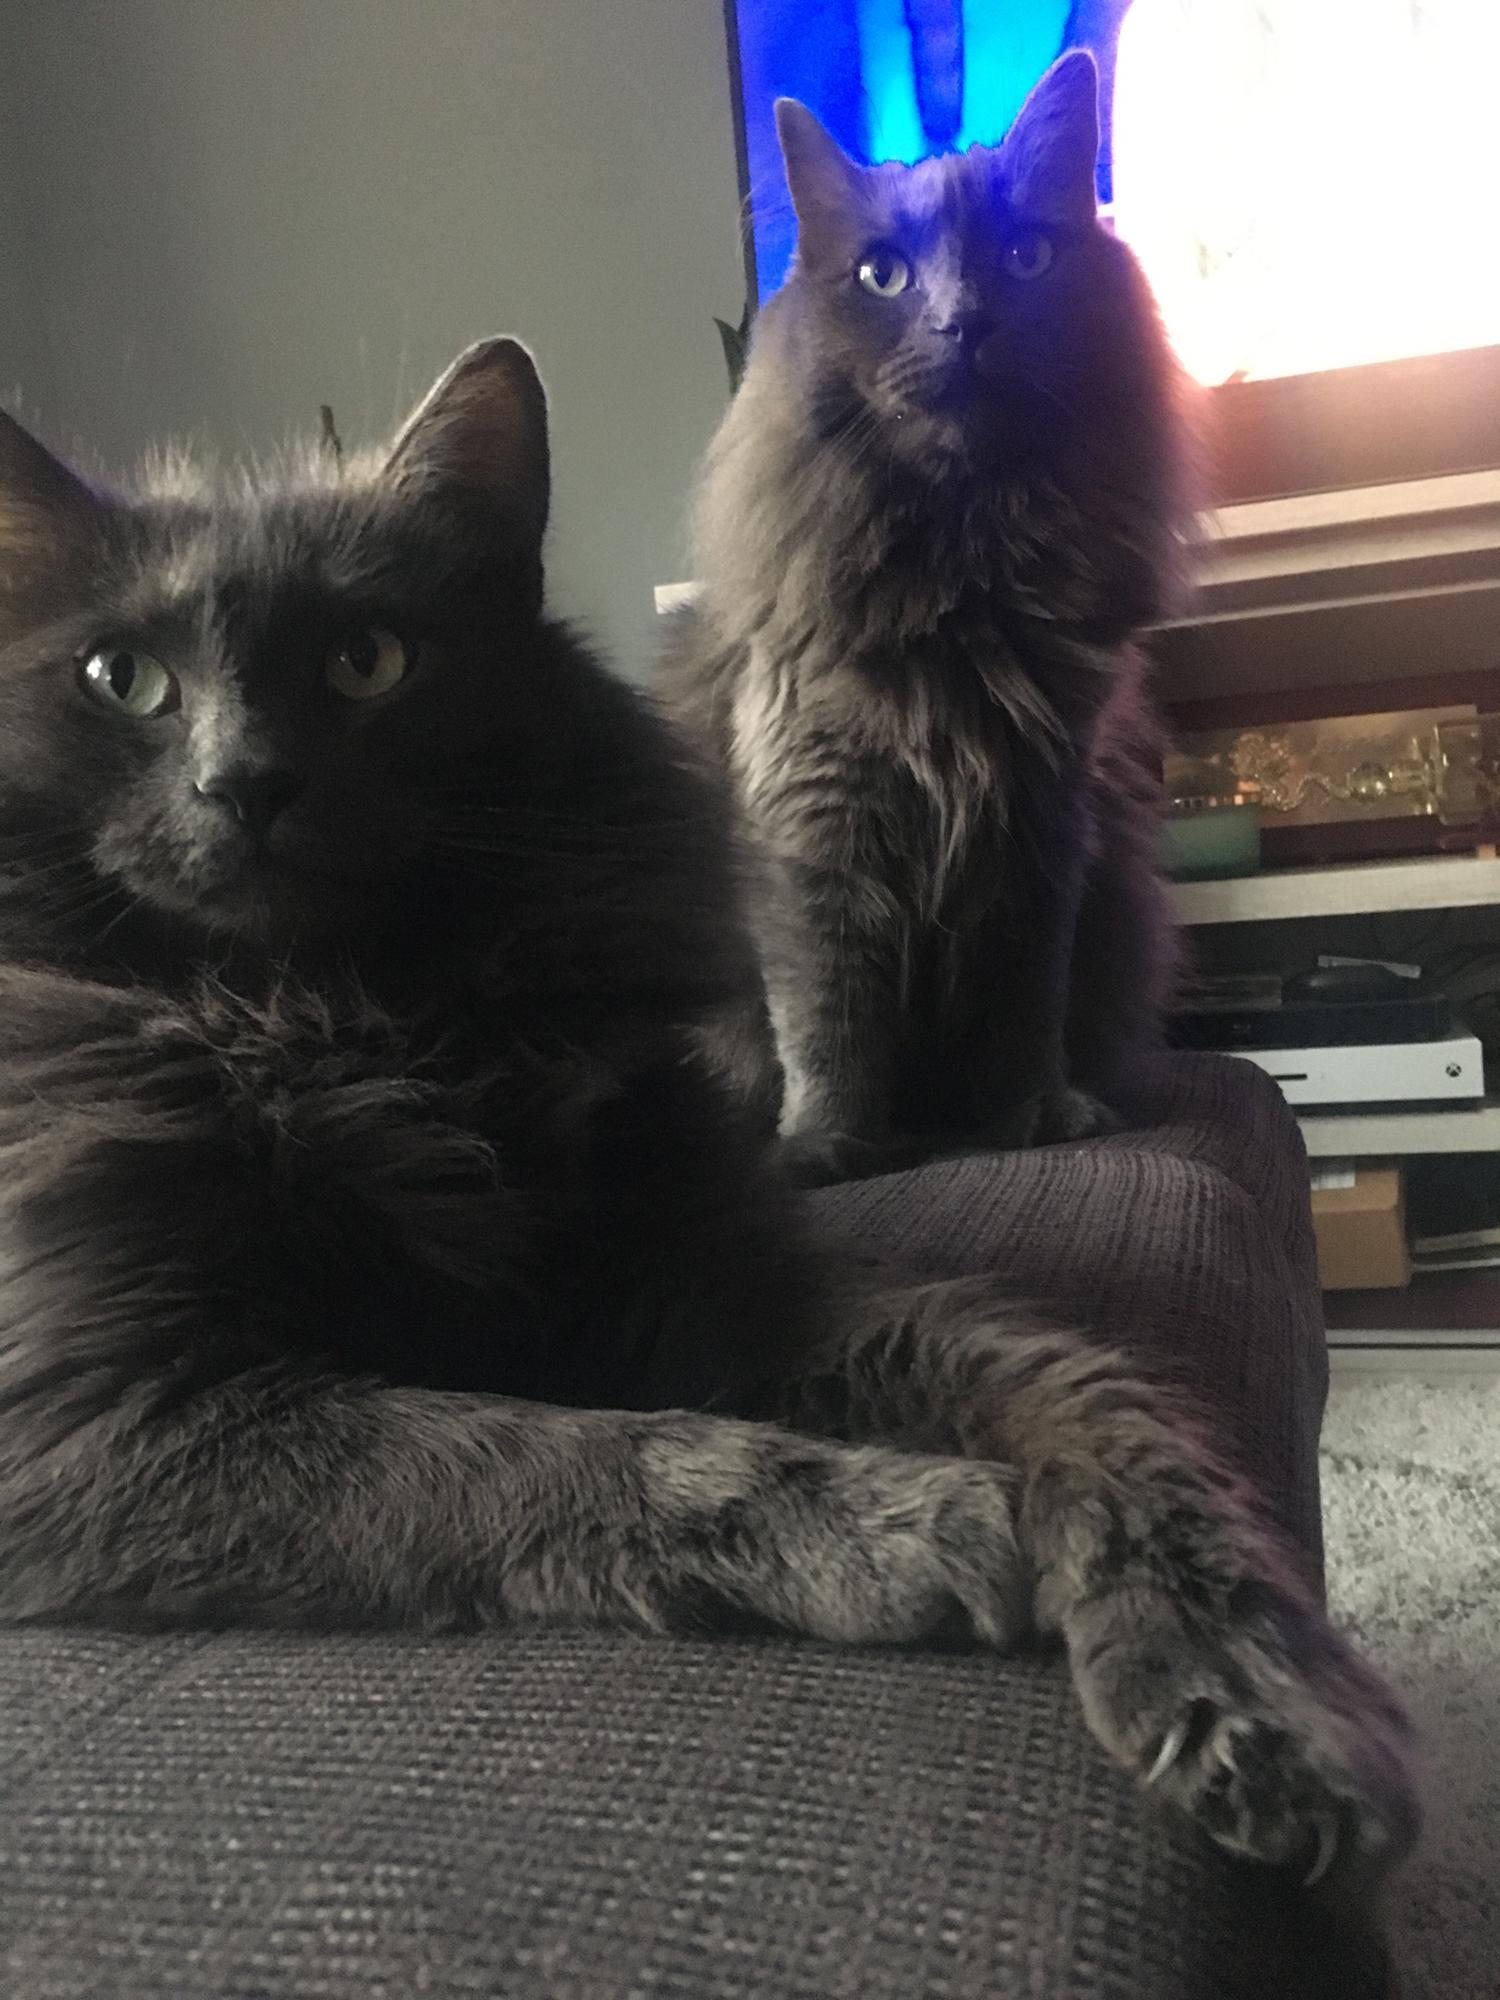 Our fur babies, Marcus and Mia!